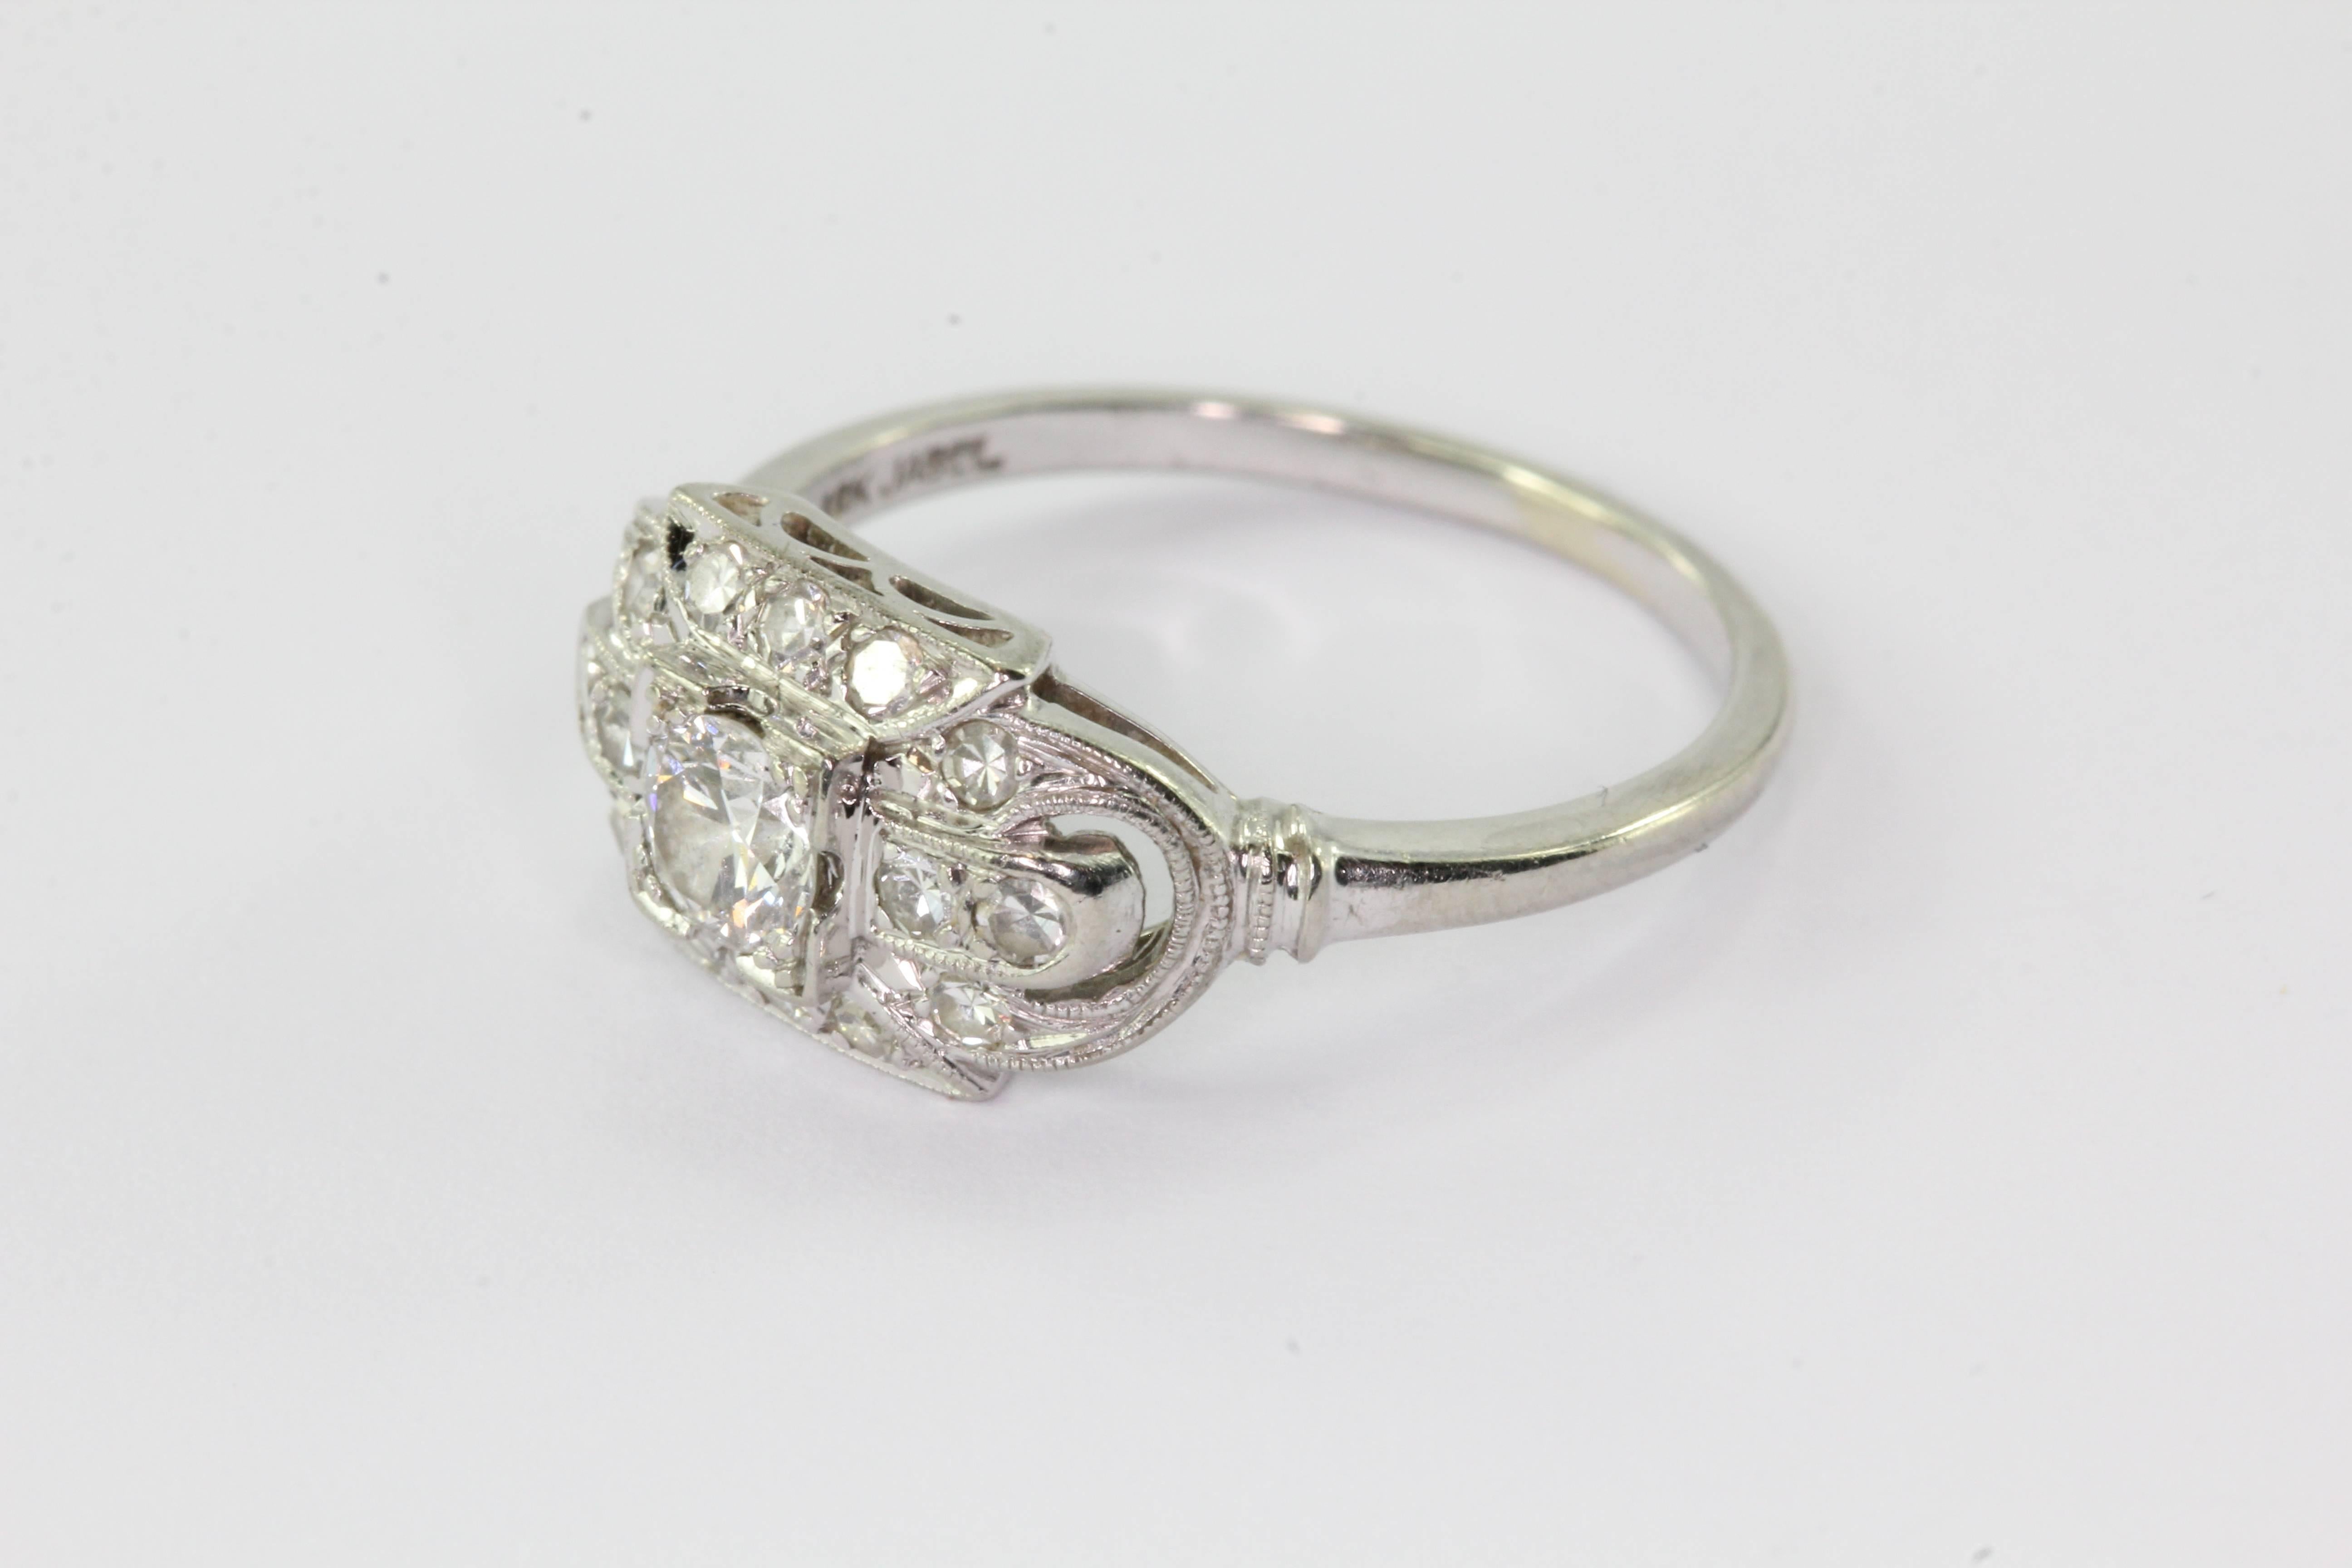 18K White Gold Transition Cut Diamond Art Deco Engagement Ring by JABEL. The ring is in excellent estate condition and ready to wear. The ring is signed JABEL 18K. Jabel was founded in 1916 by Jack J. Abelson out of Newark NJ. The ring is set with